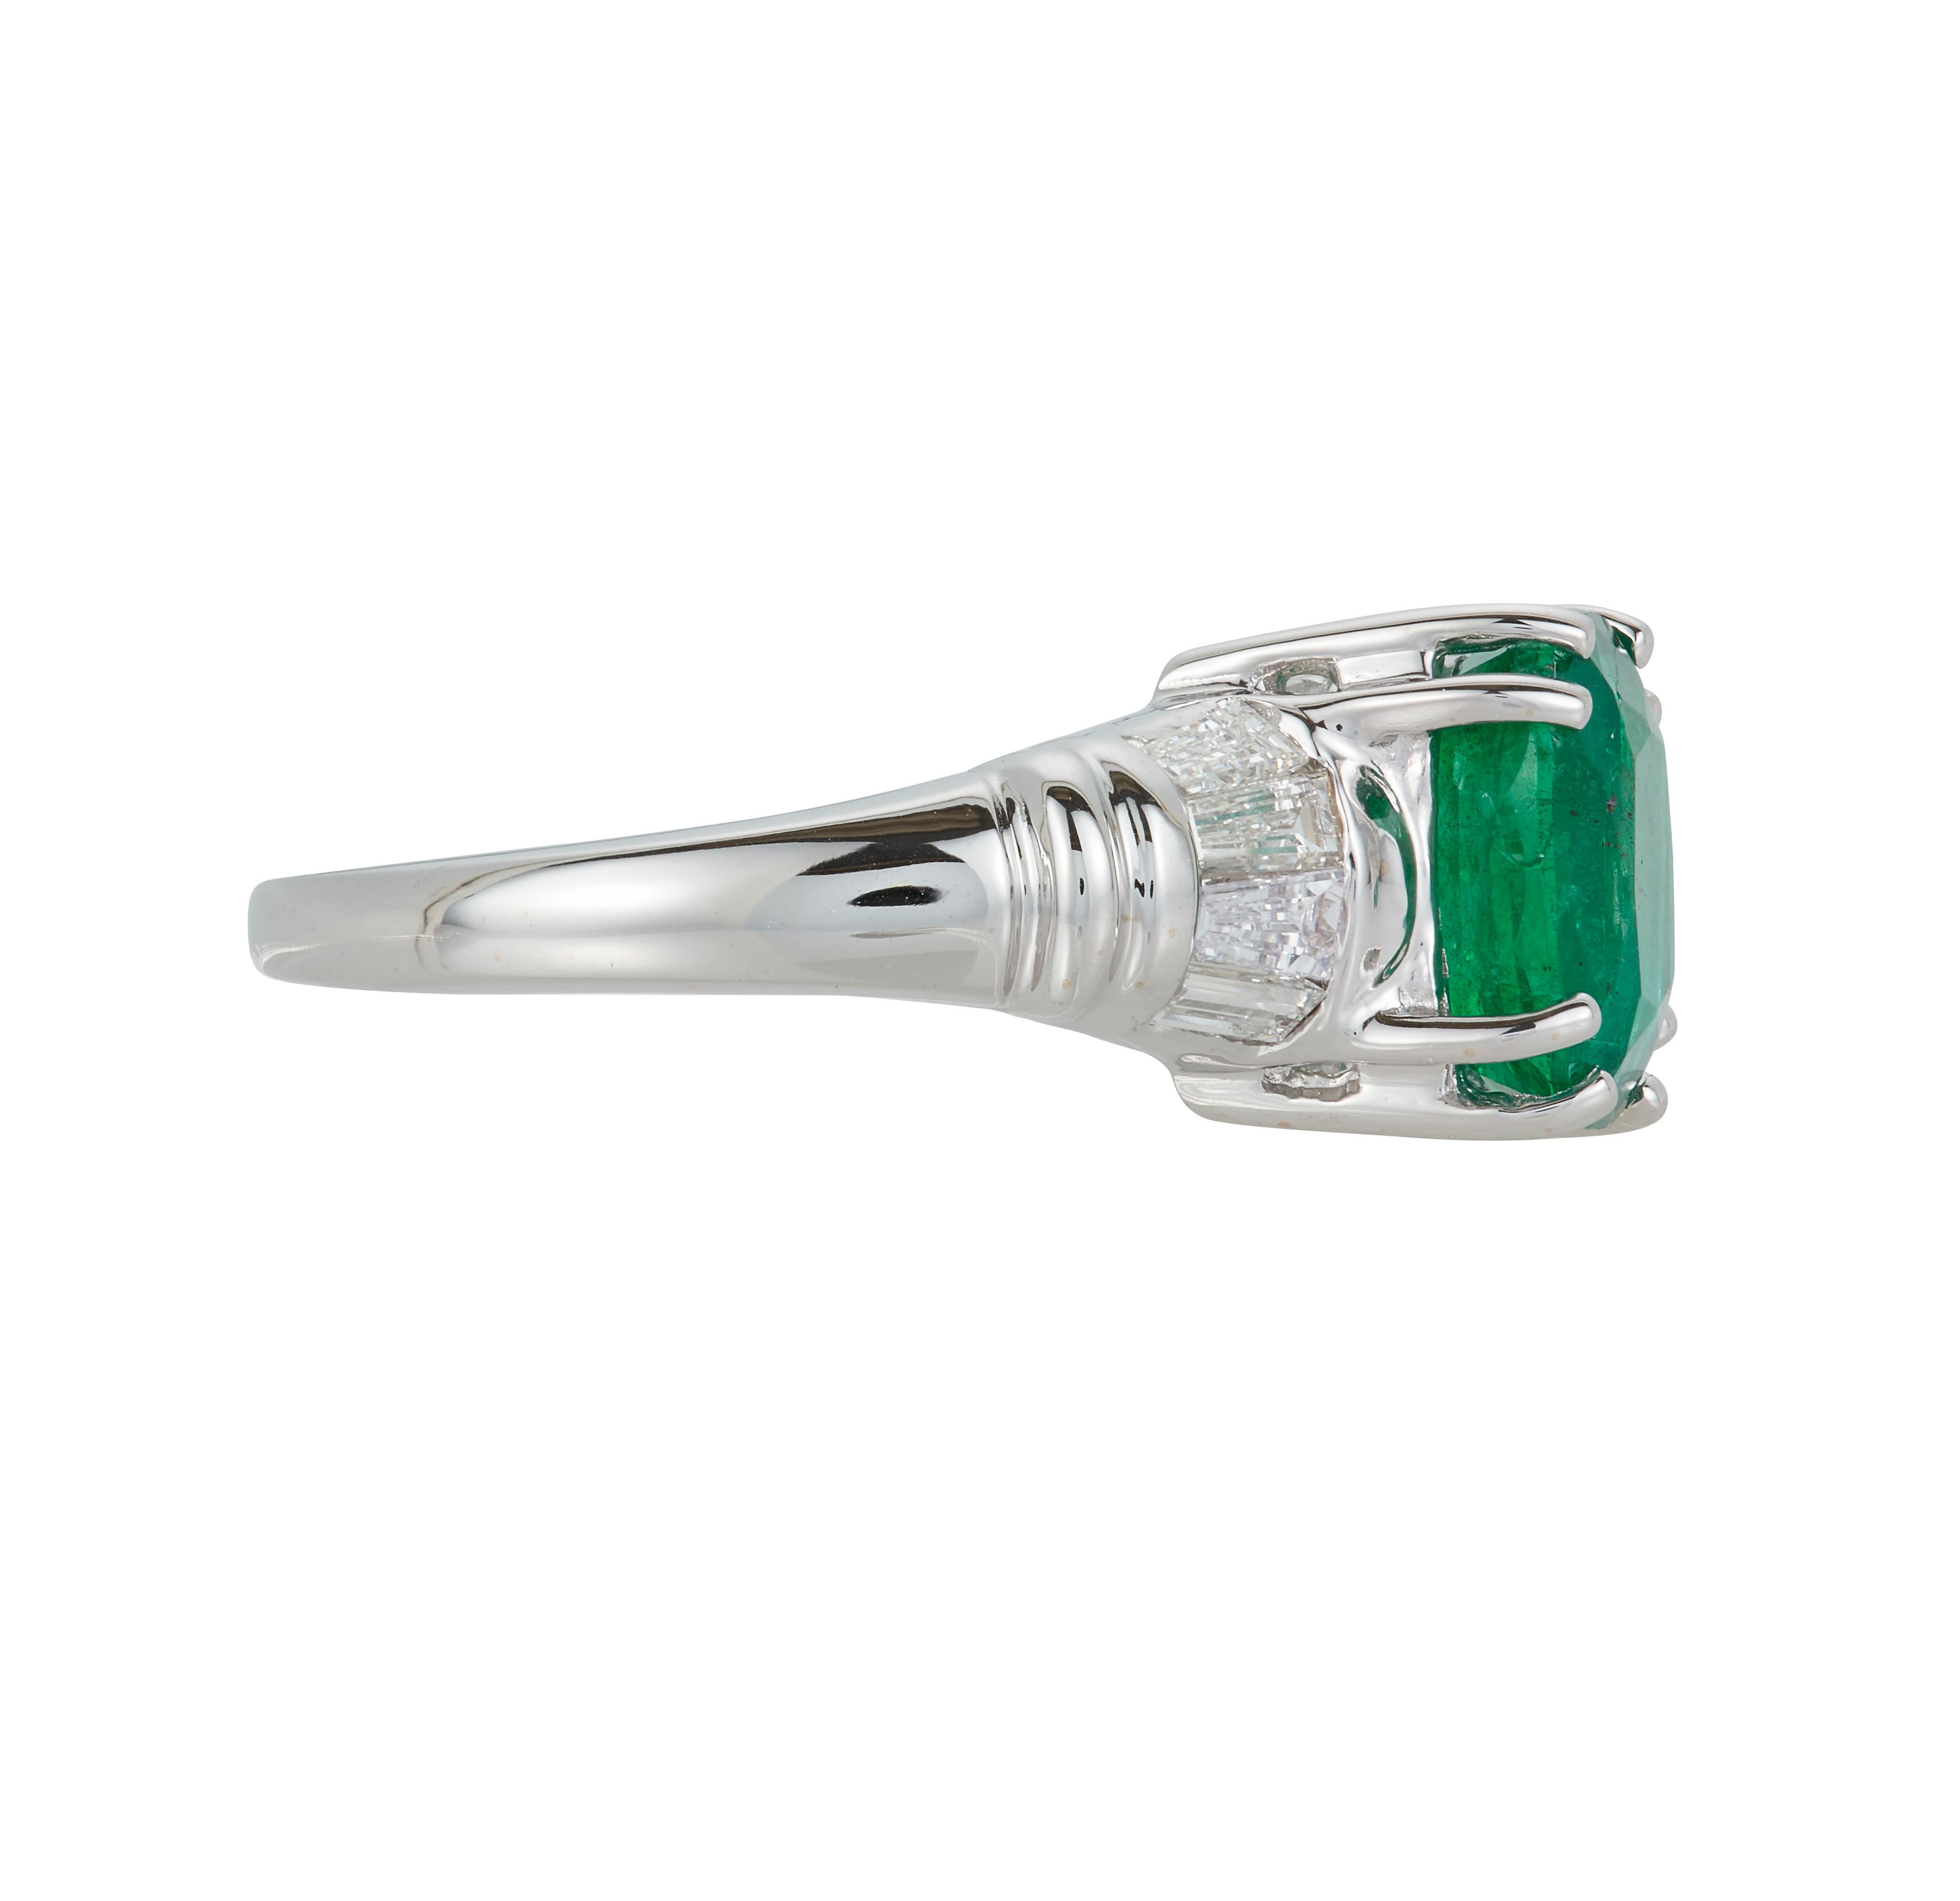 18K White Gold
1 Cushion Cut Emerald at 2.71 Carats- Measuring 8.4 x 9.1 mm
8 Baguette White Diamonds at 0.43 Carats - Color: H-I /Clarity: SI

Alberto offers complimentary sizing on all rings.

Fine one-of-a-kind craftsmanship meets incredible